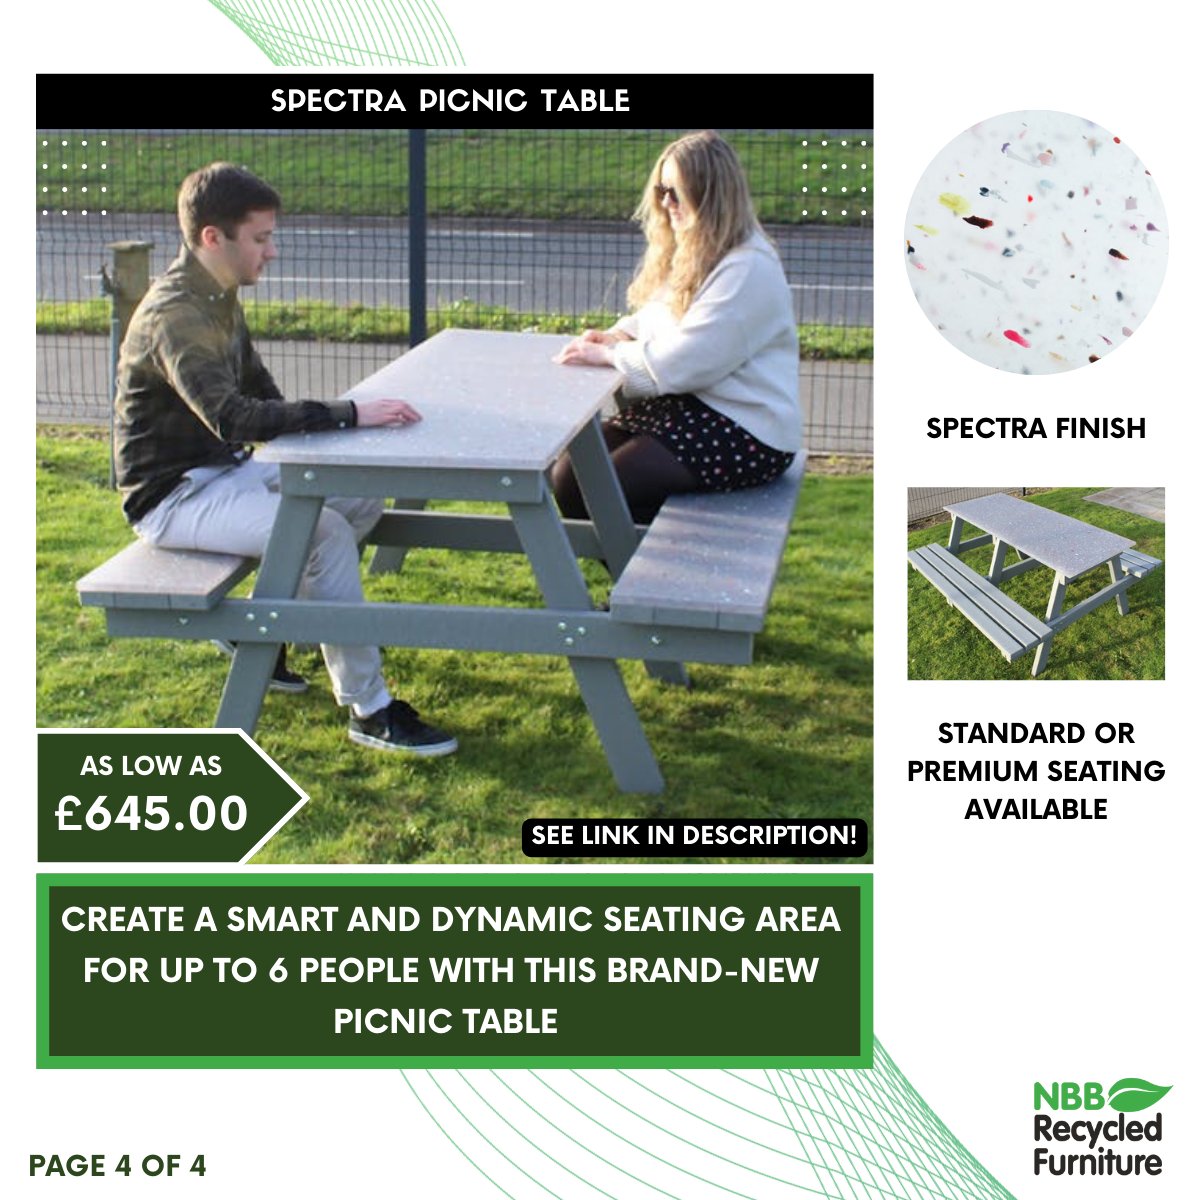 NEW PRODUCT ALERT! Brand New Artisan Picnic Tables are now available exclusively from NBB! Discover the five one-of-a-kind finishes in more detail today --> bit.ly/49E8RyX #NBBRecycledFurniture #artisanpicnictable #picnictables #recycledplastic #furniture #handcrafted